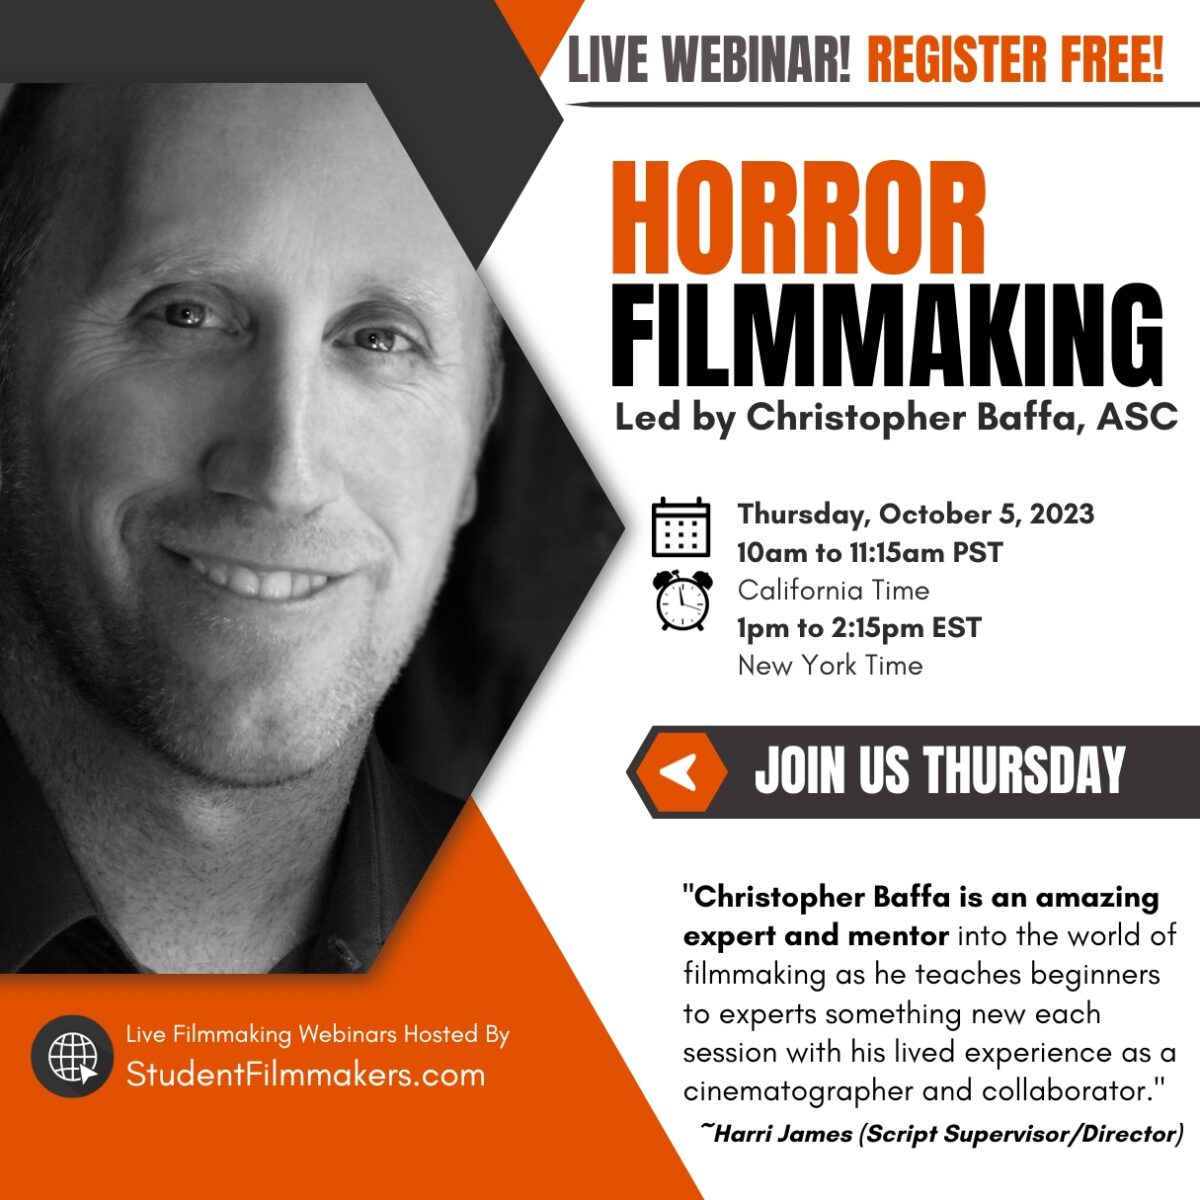 Horror Filmmaking Live Webinar with Christopher Baffa, ASC, hosted by StudentFilmmakers.com